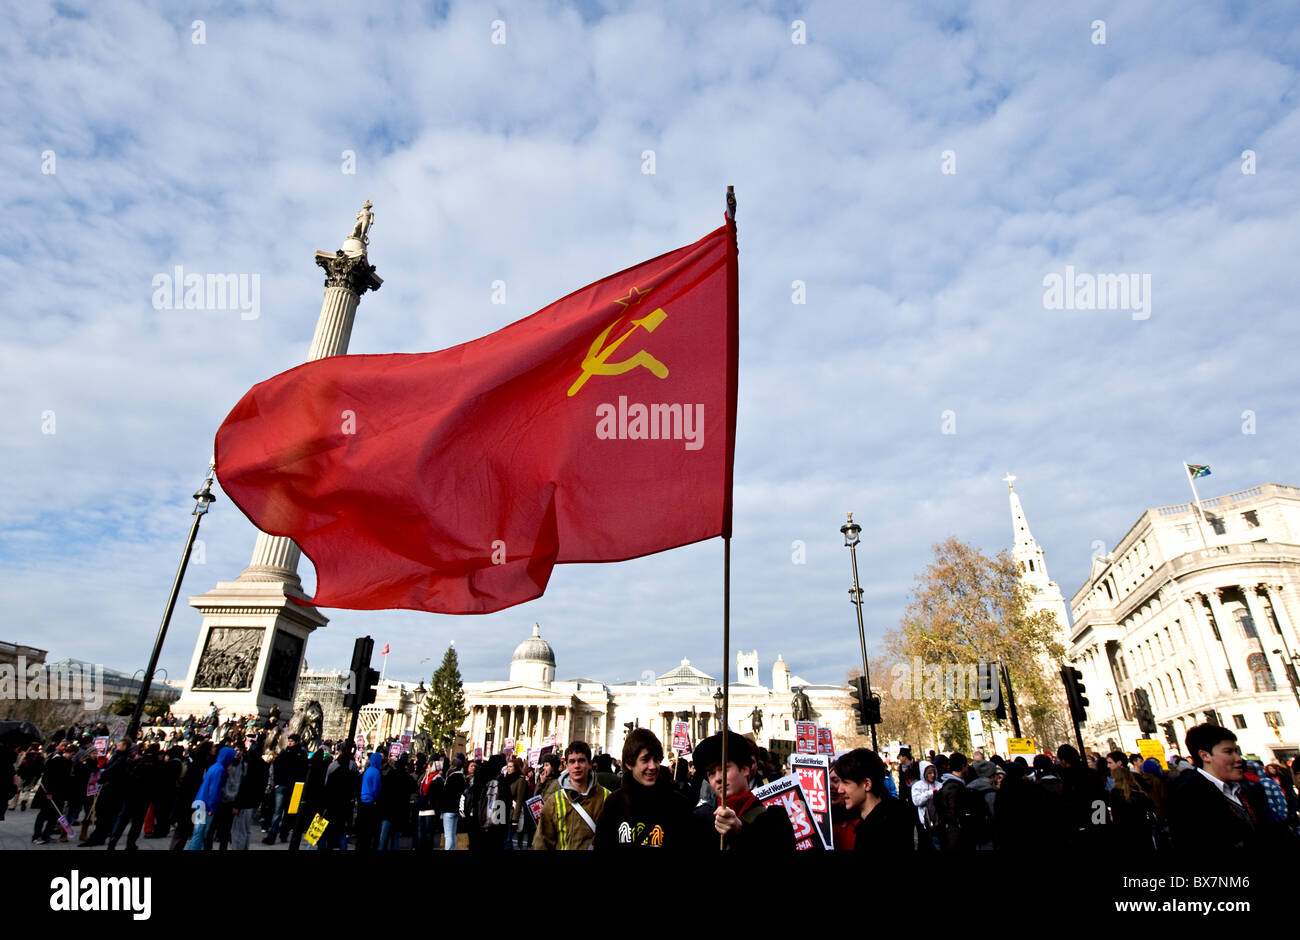 A communist flag held by students at a demonstration in Trafalgar Square in London. Stock Photo